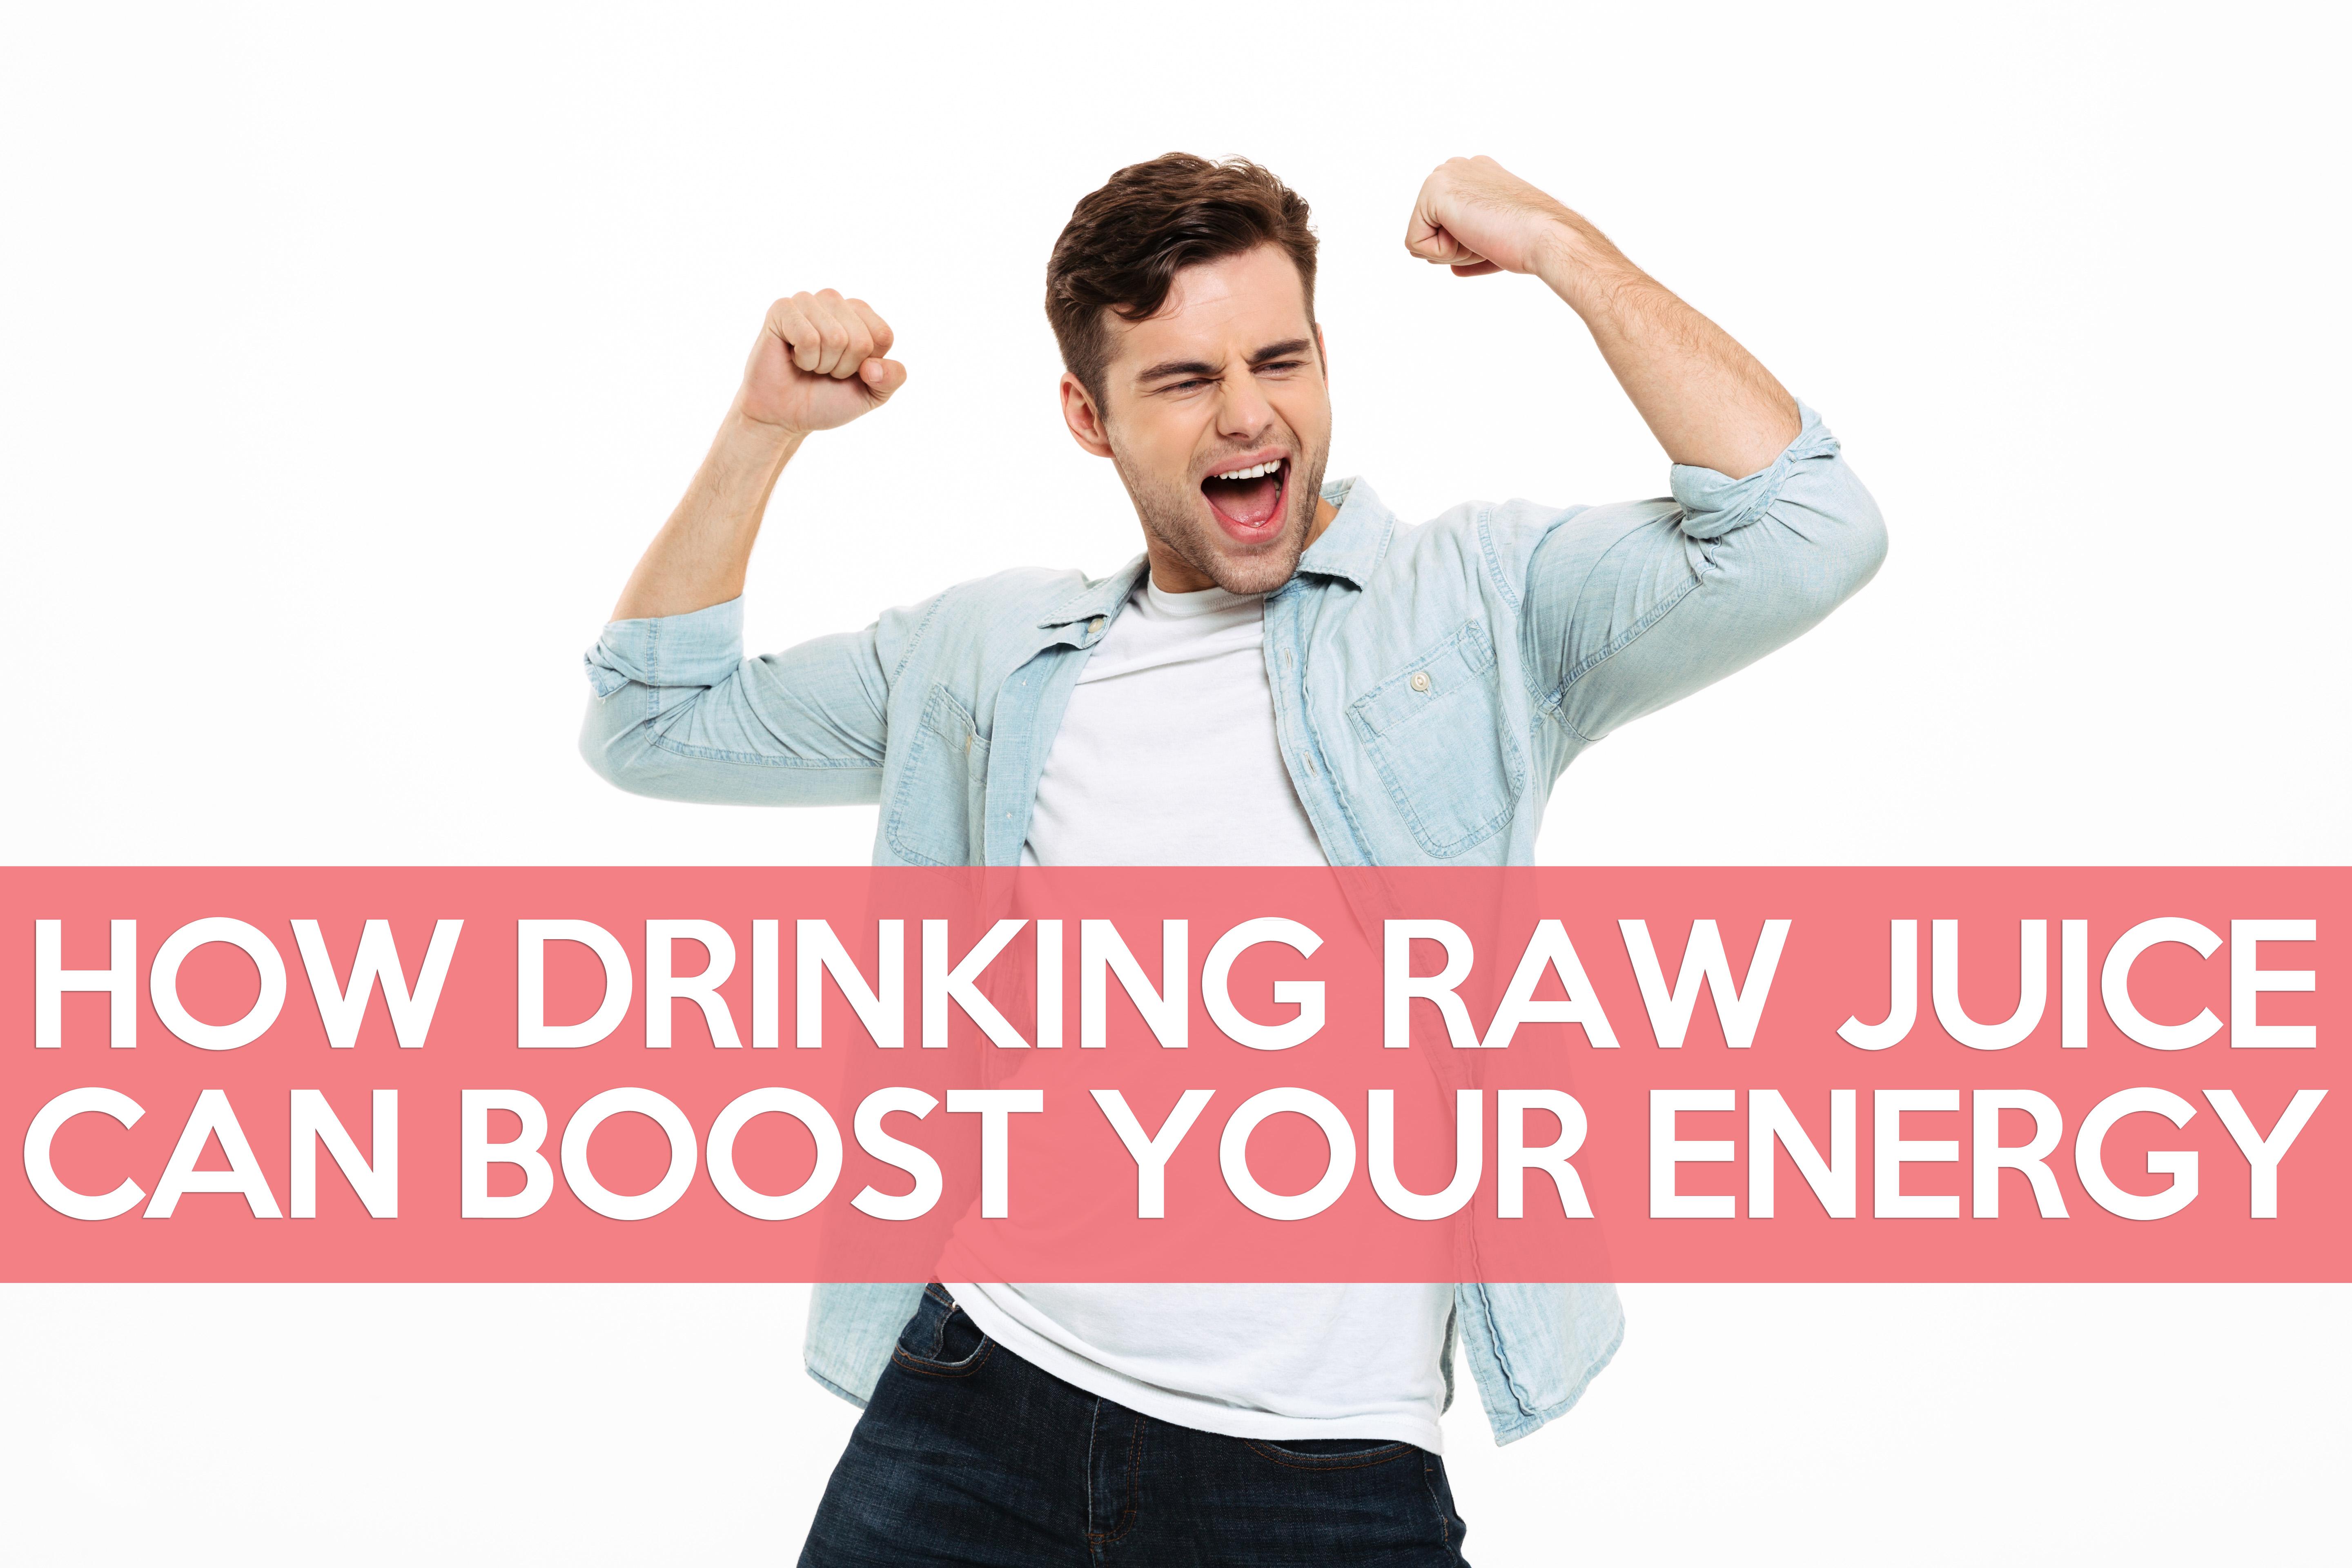 Do Energy Drinks Really Boost Your Energy?